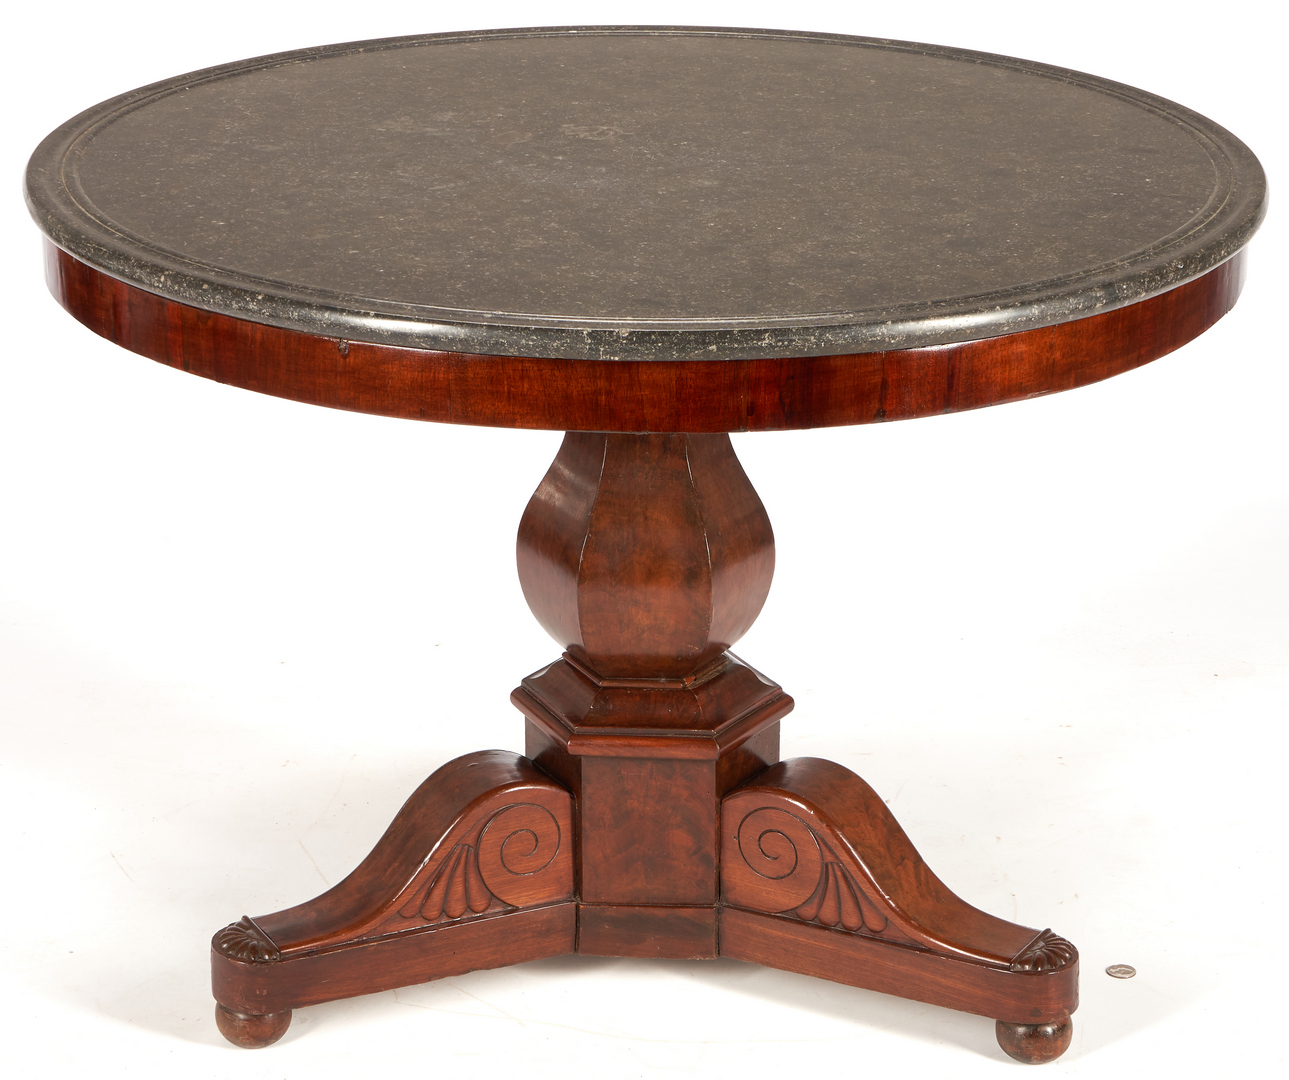 Lot 277: 19th C. Center Table with Black Marble Top